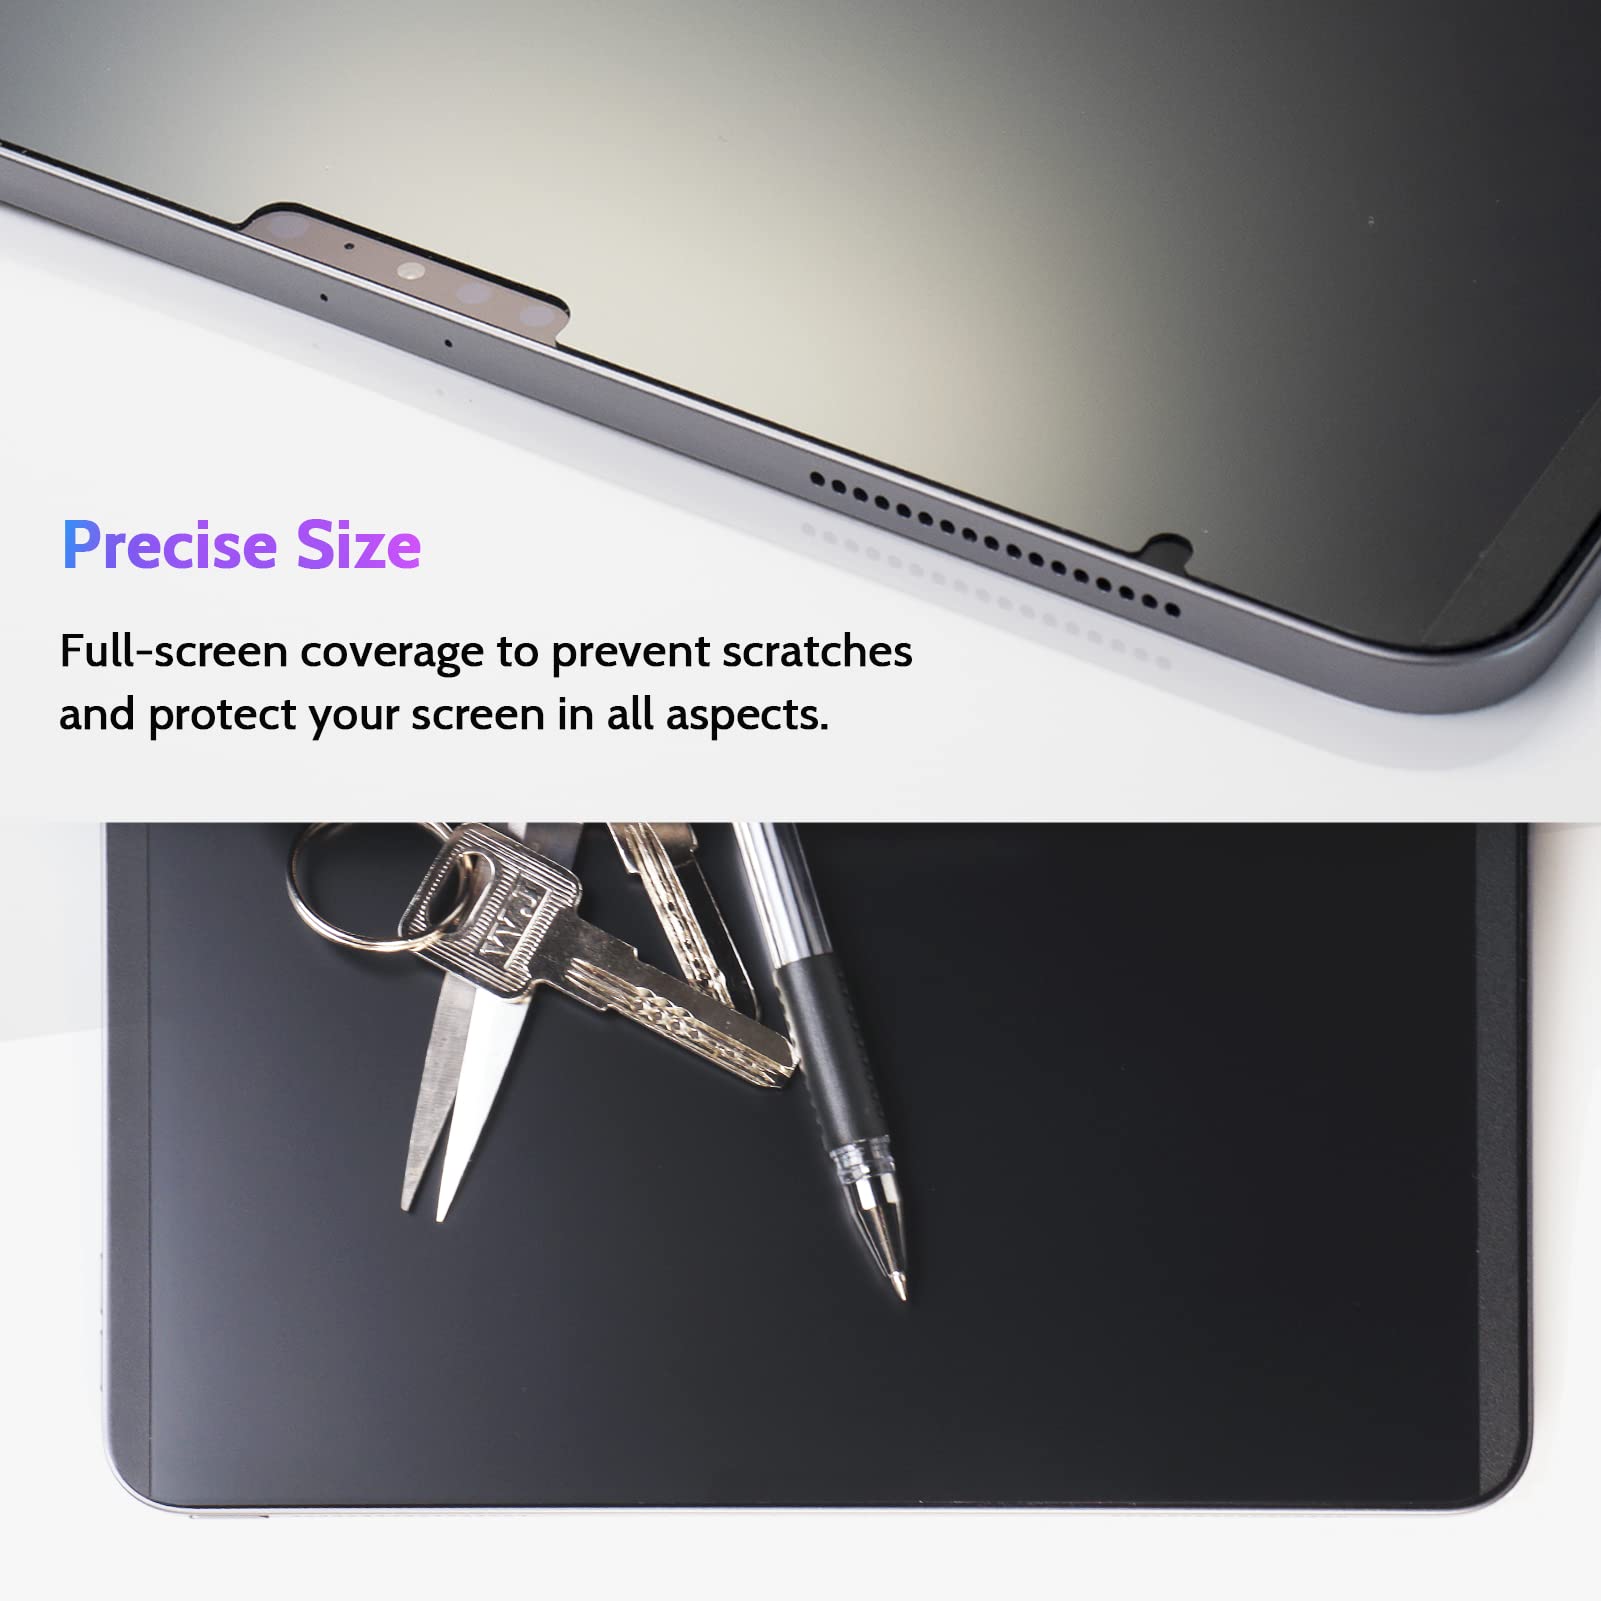 Magnetic Privacy Screen Protector For Ipad 10.2 M1 Pro 11 12.9 Air 2/3/4/5  10.9 10.5 Mini 5 6 Anti-spy Removable Drawing Film - Tablet Screen  Protectors - AliExpress